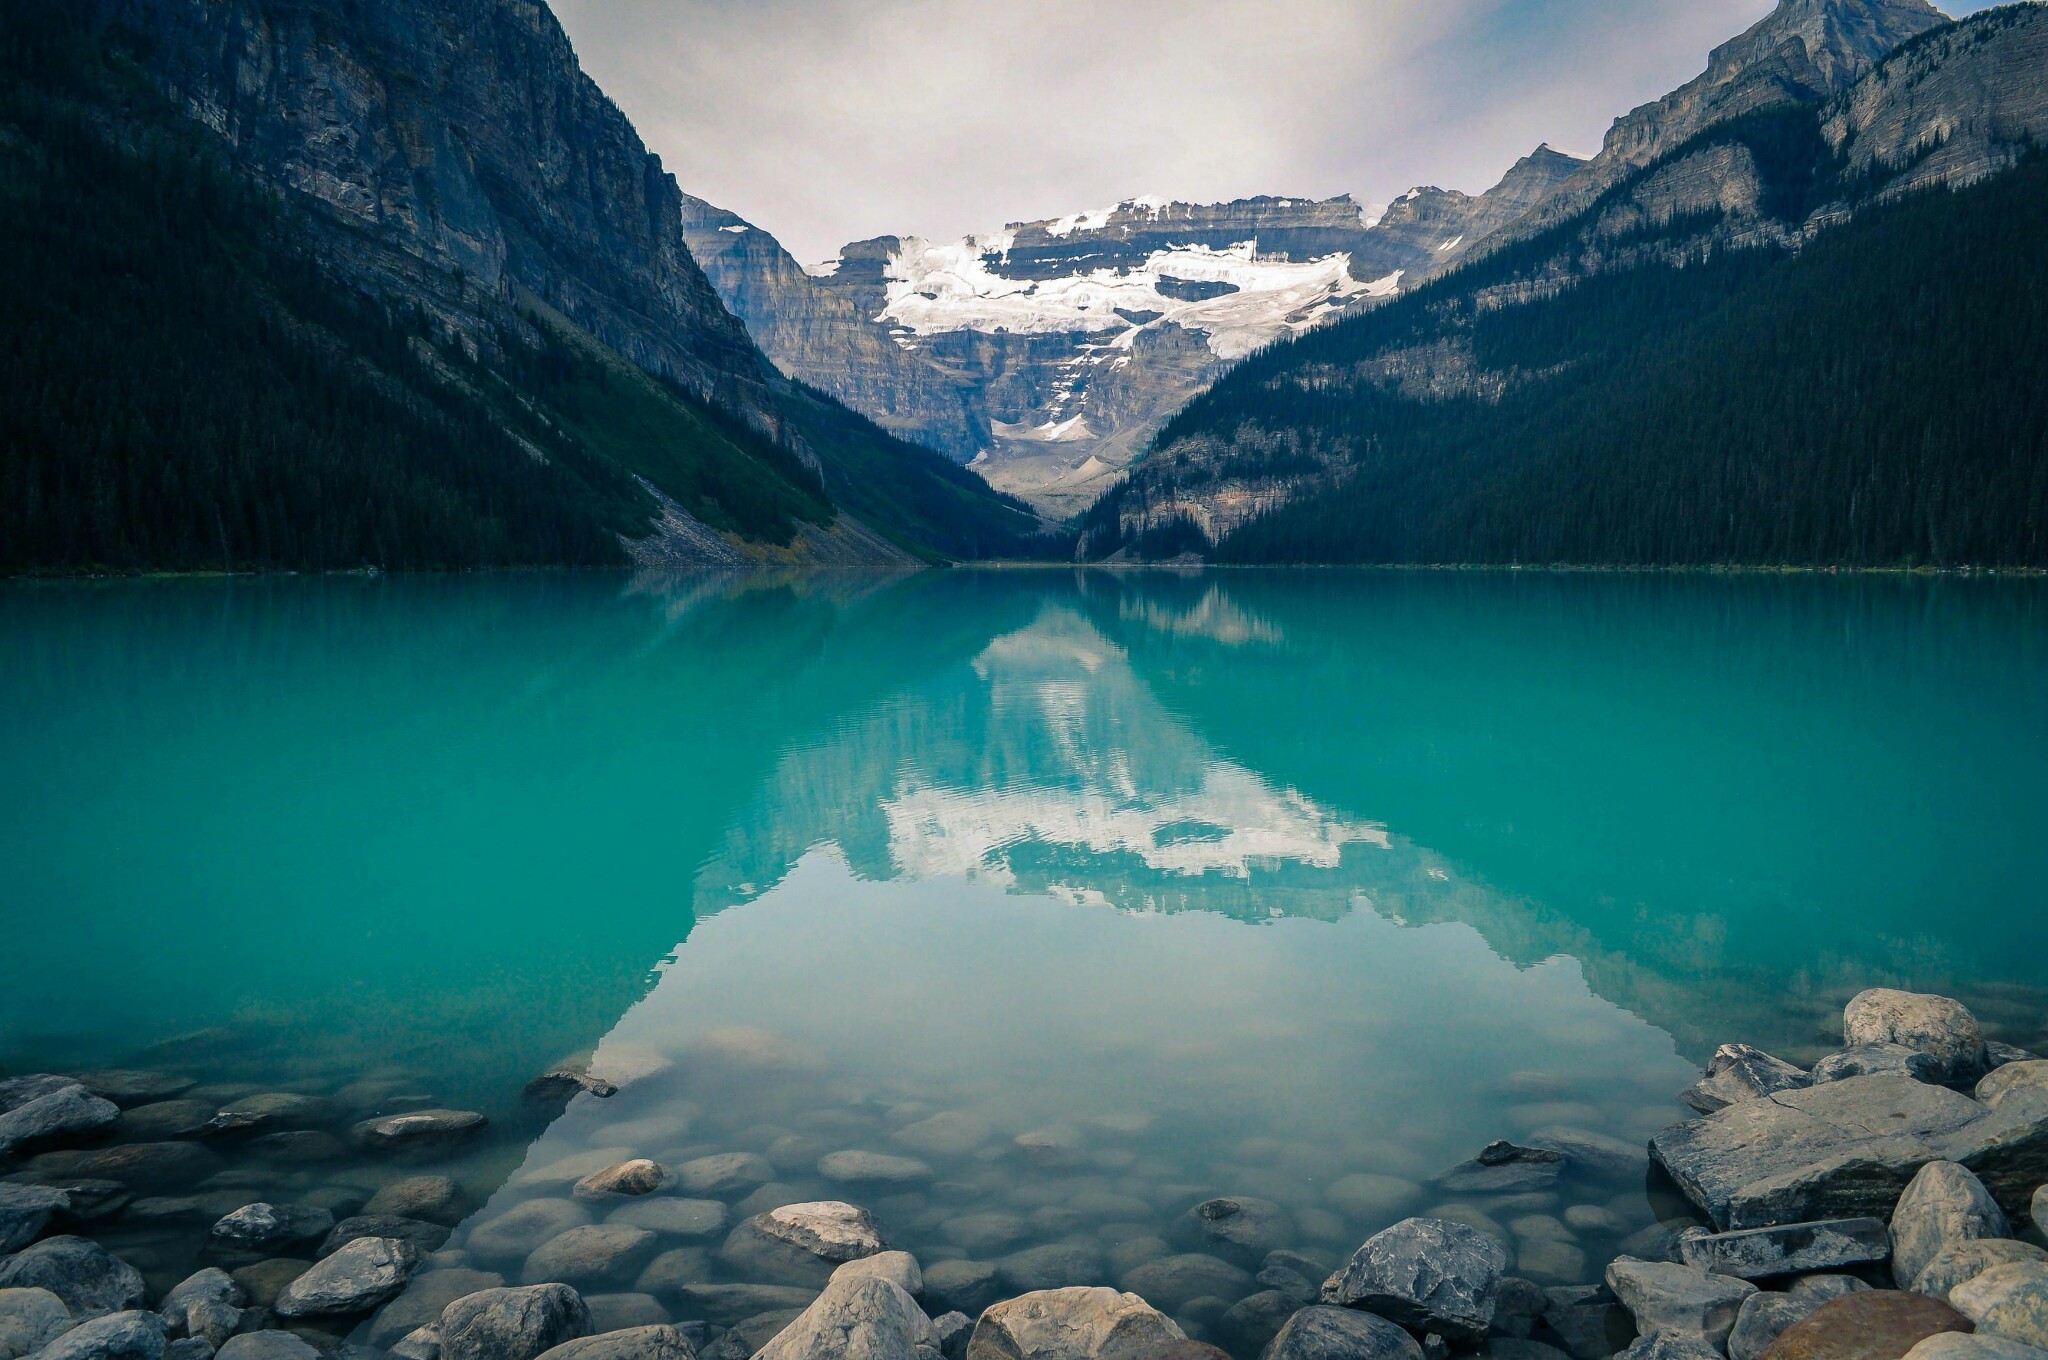 2048x1360 Download Wallpaper Mountains Lake photo 0061.gif | Mountains | Pinterest |  Nature gif Download Mountain Wallpapers Images Photos Backgrounds ...